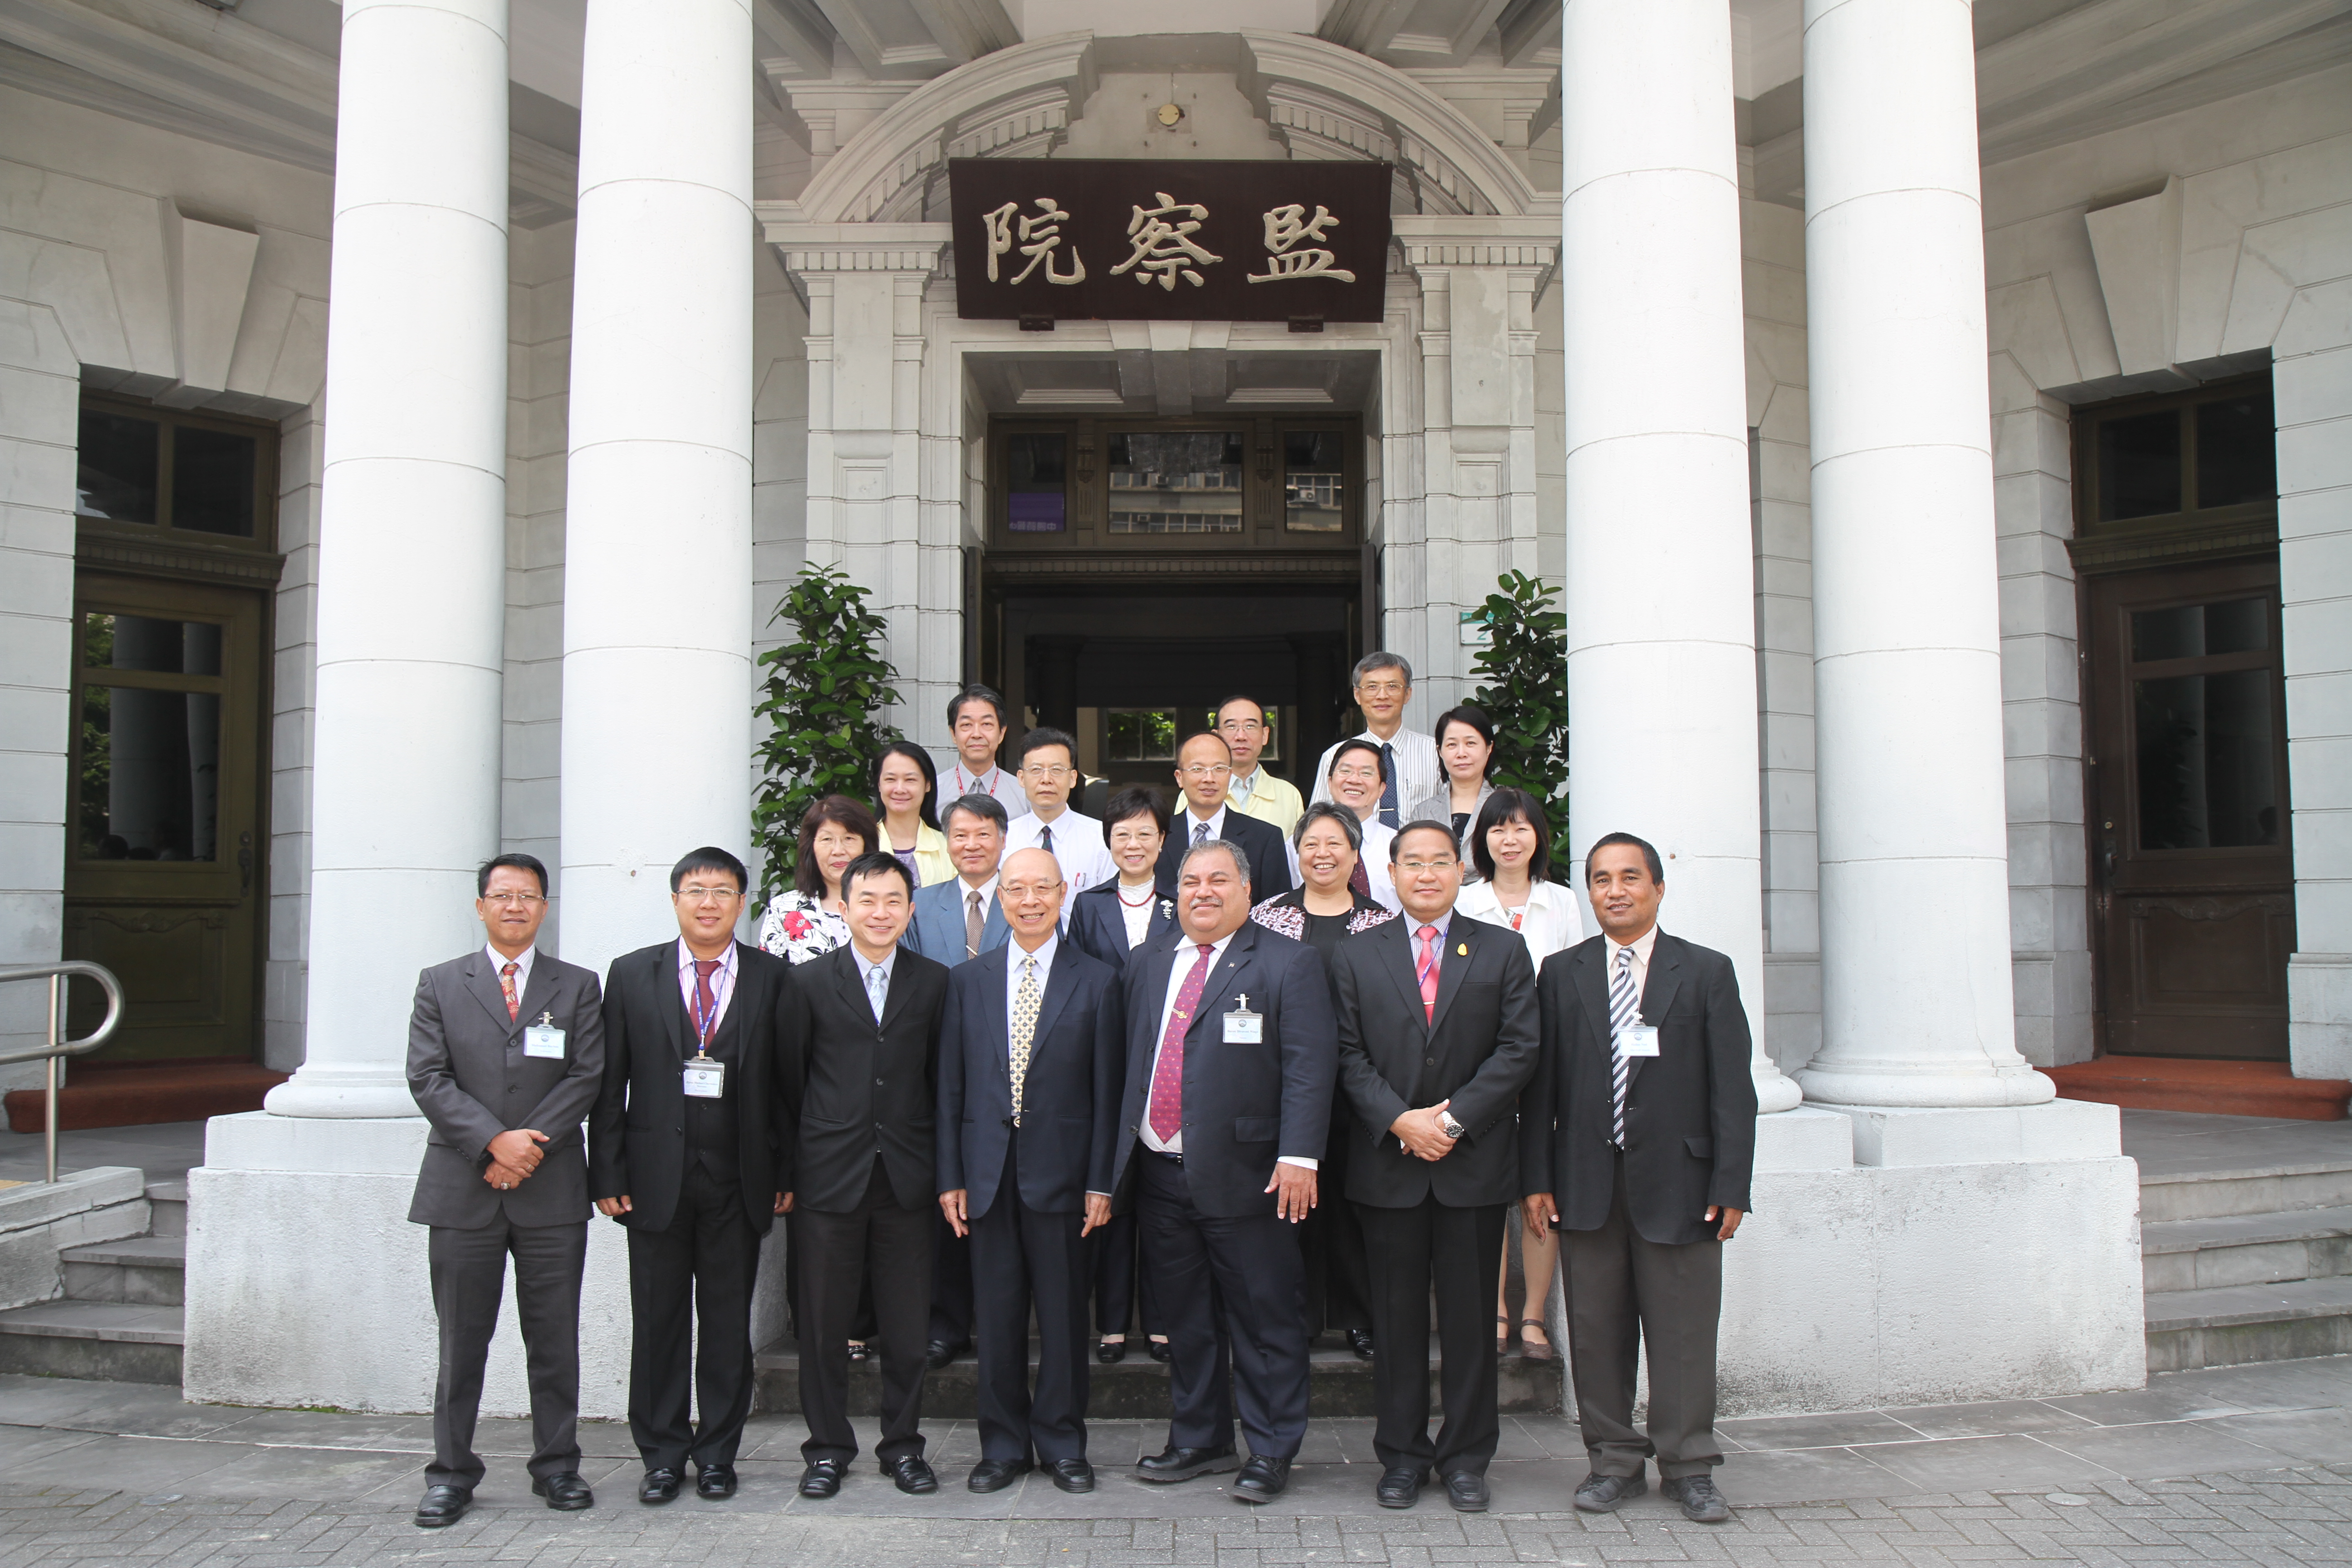 2012 Staff Exchange Program between the Control Yuan and Asian-Pacific Ombudsman/Human Rights Offices